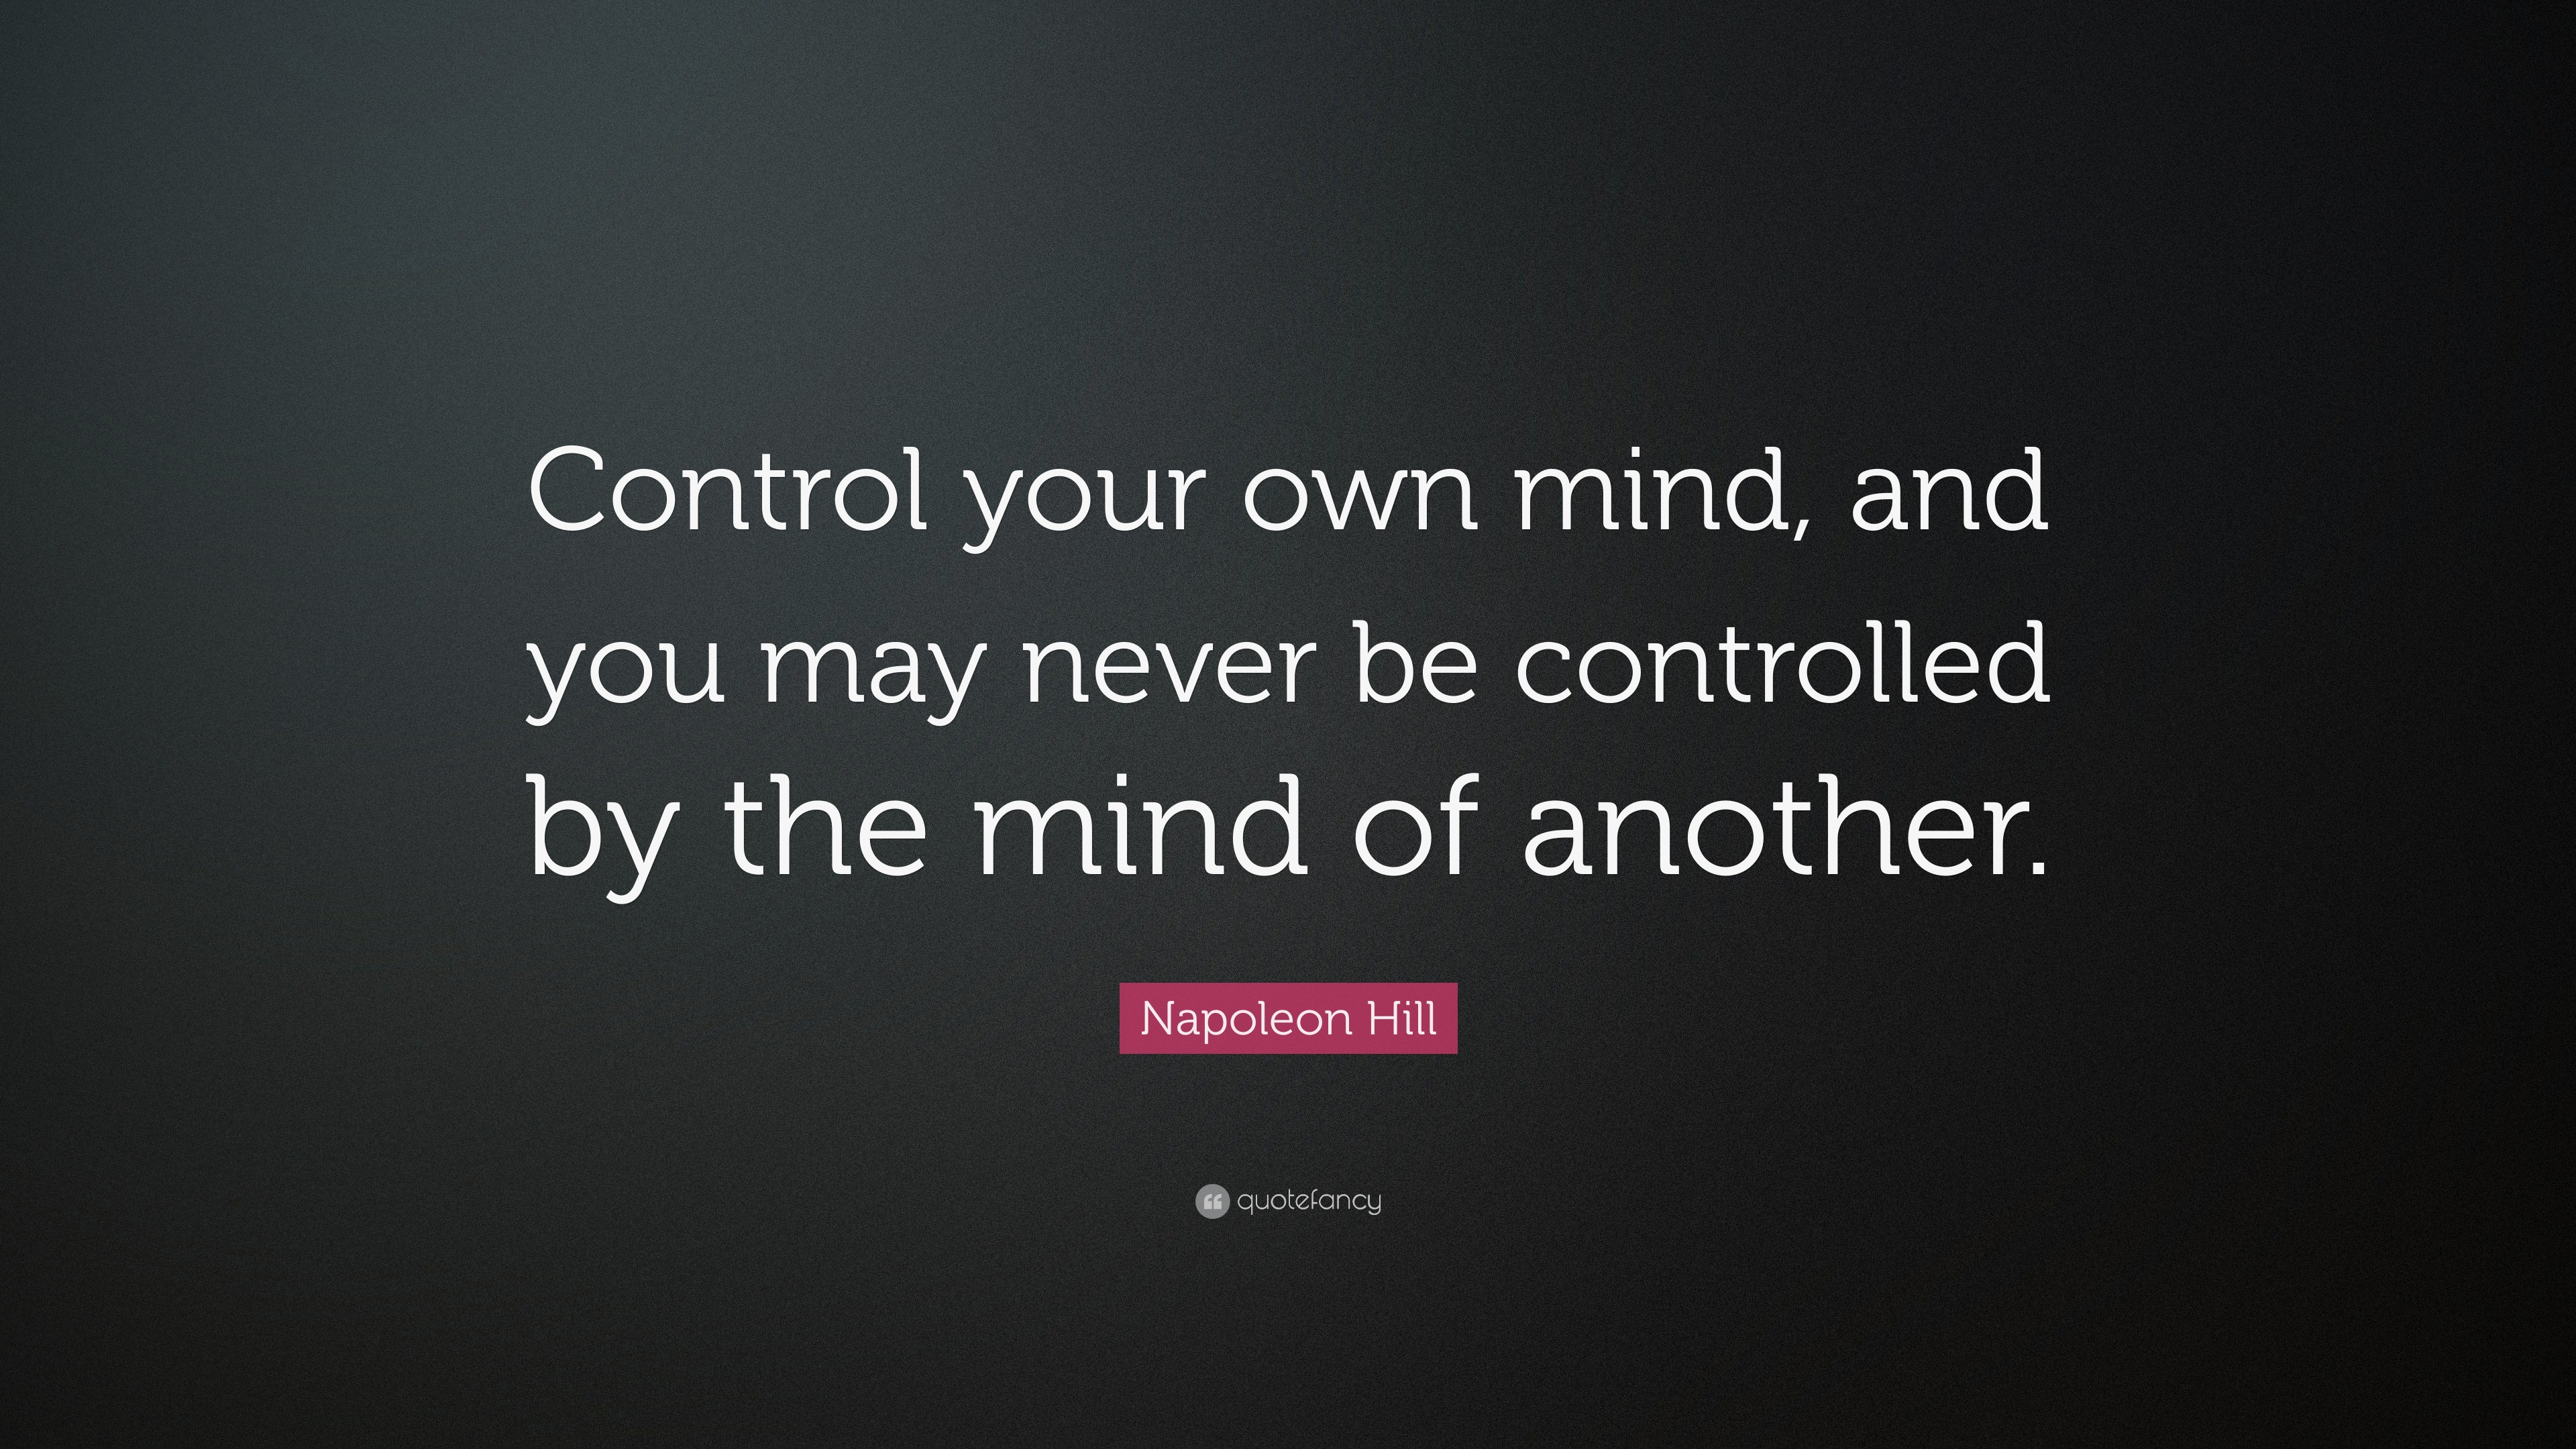 Napoleon Hill Quote: “Control Your Own Mind, And You May Never Be